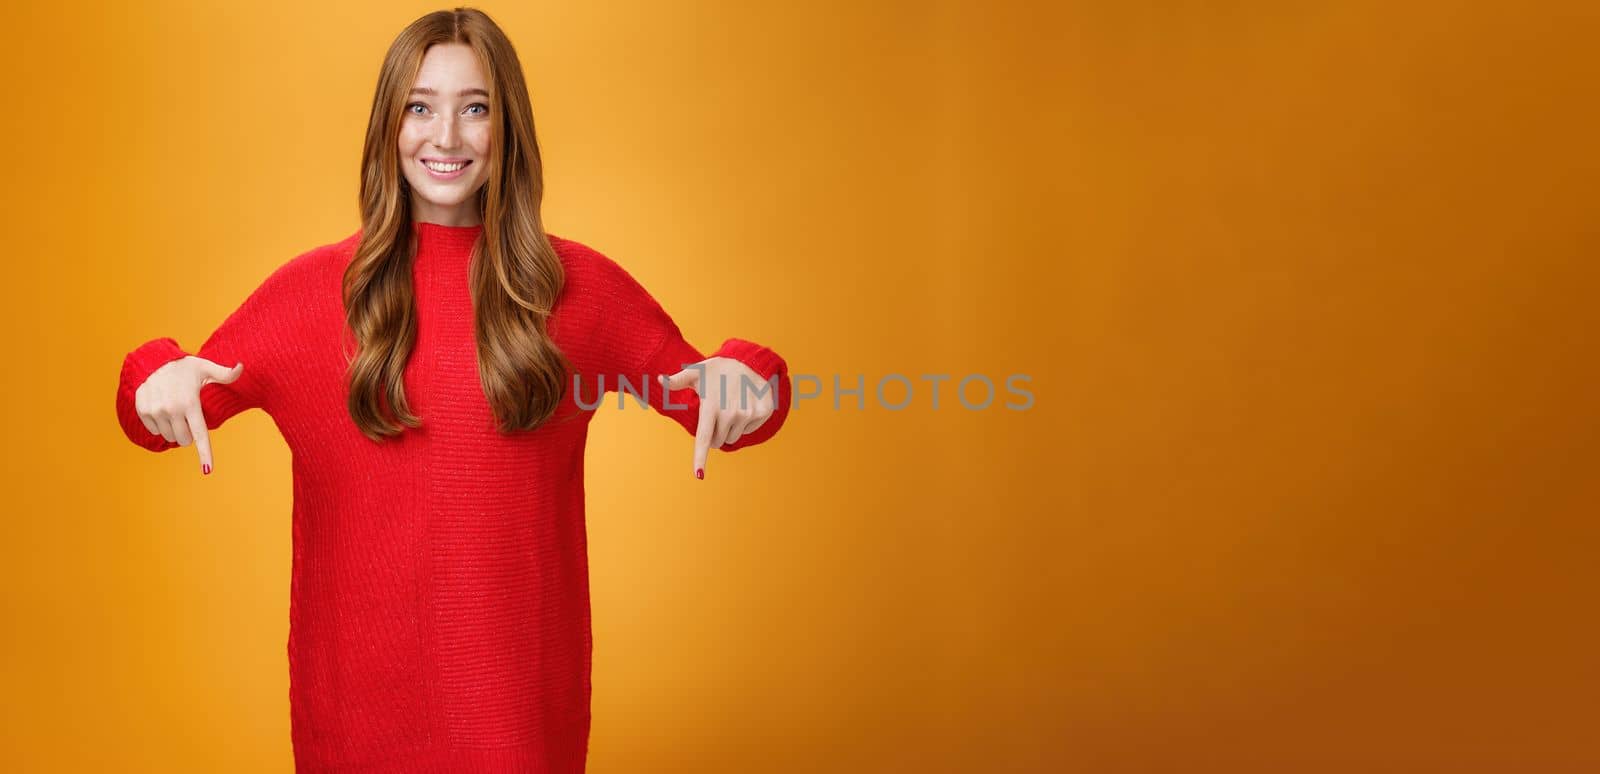 Gentle and tender cute ginger girl with freckles and blue eyes feeling touched and pleased, pointing at heartwarming promotion, showing direction down and smiling against orange background.